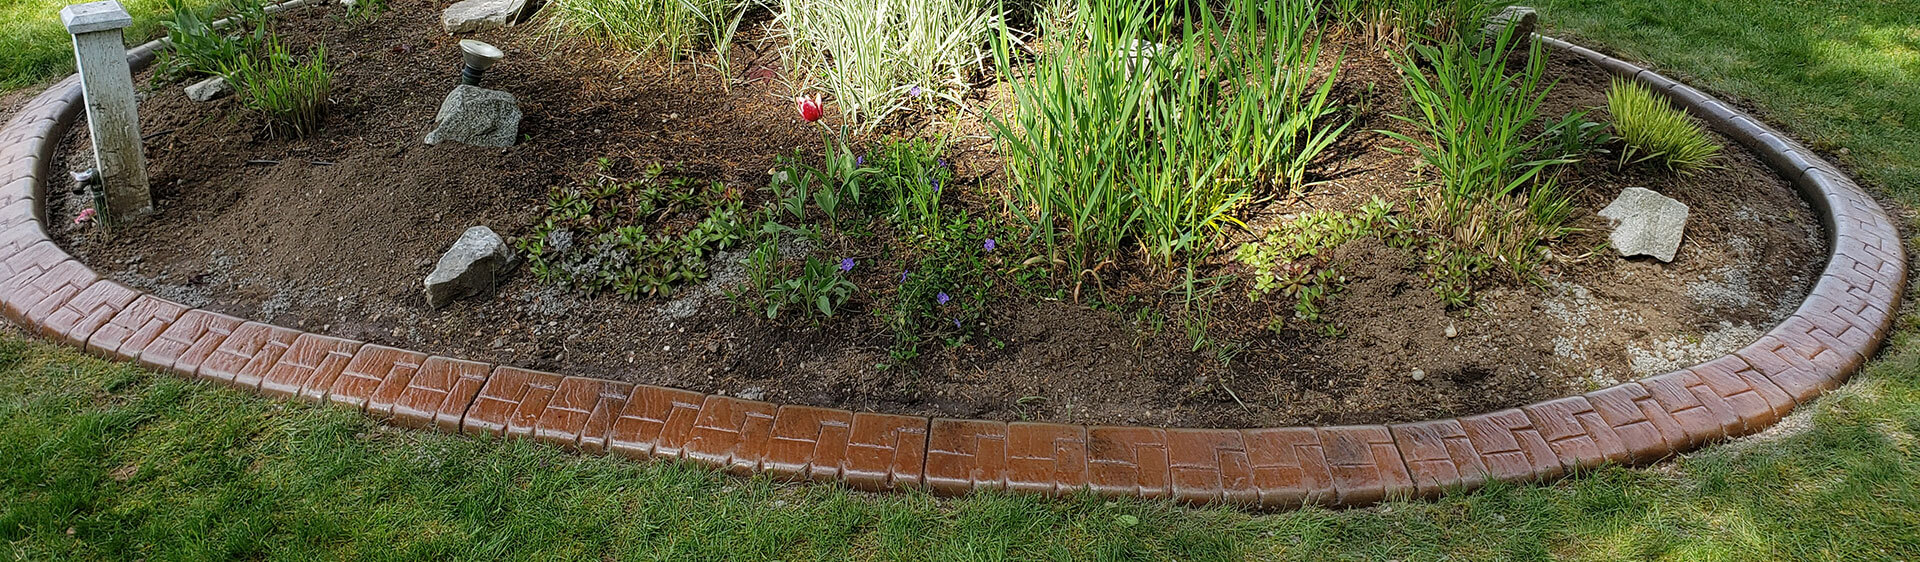 Fraser Valley Concrete Curbing, Garden Edging and Curb Repairs